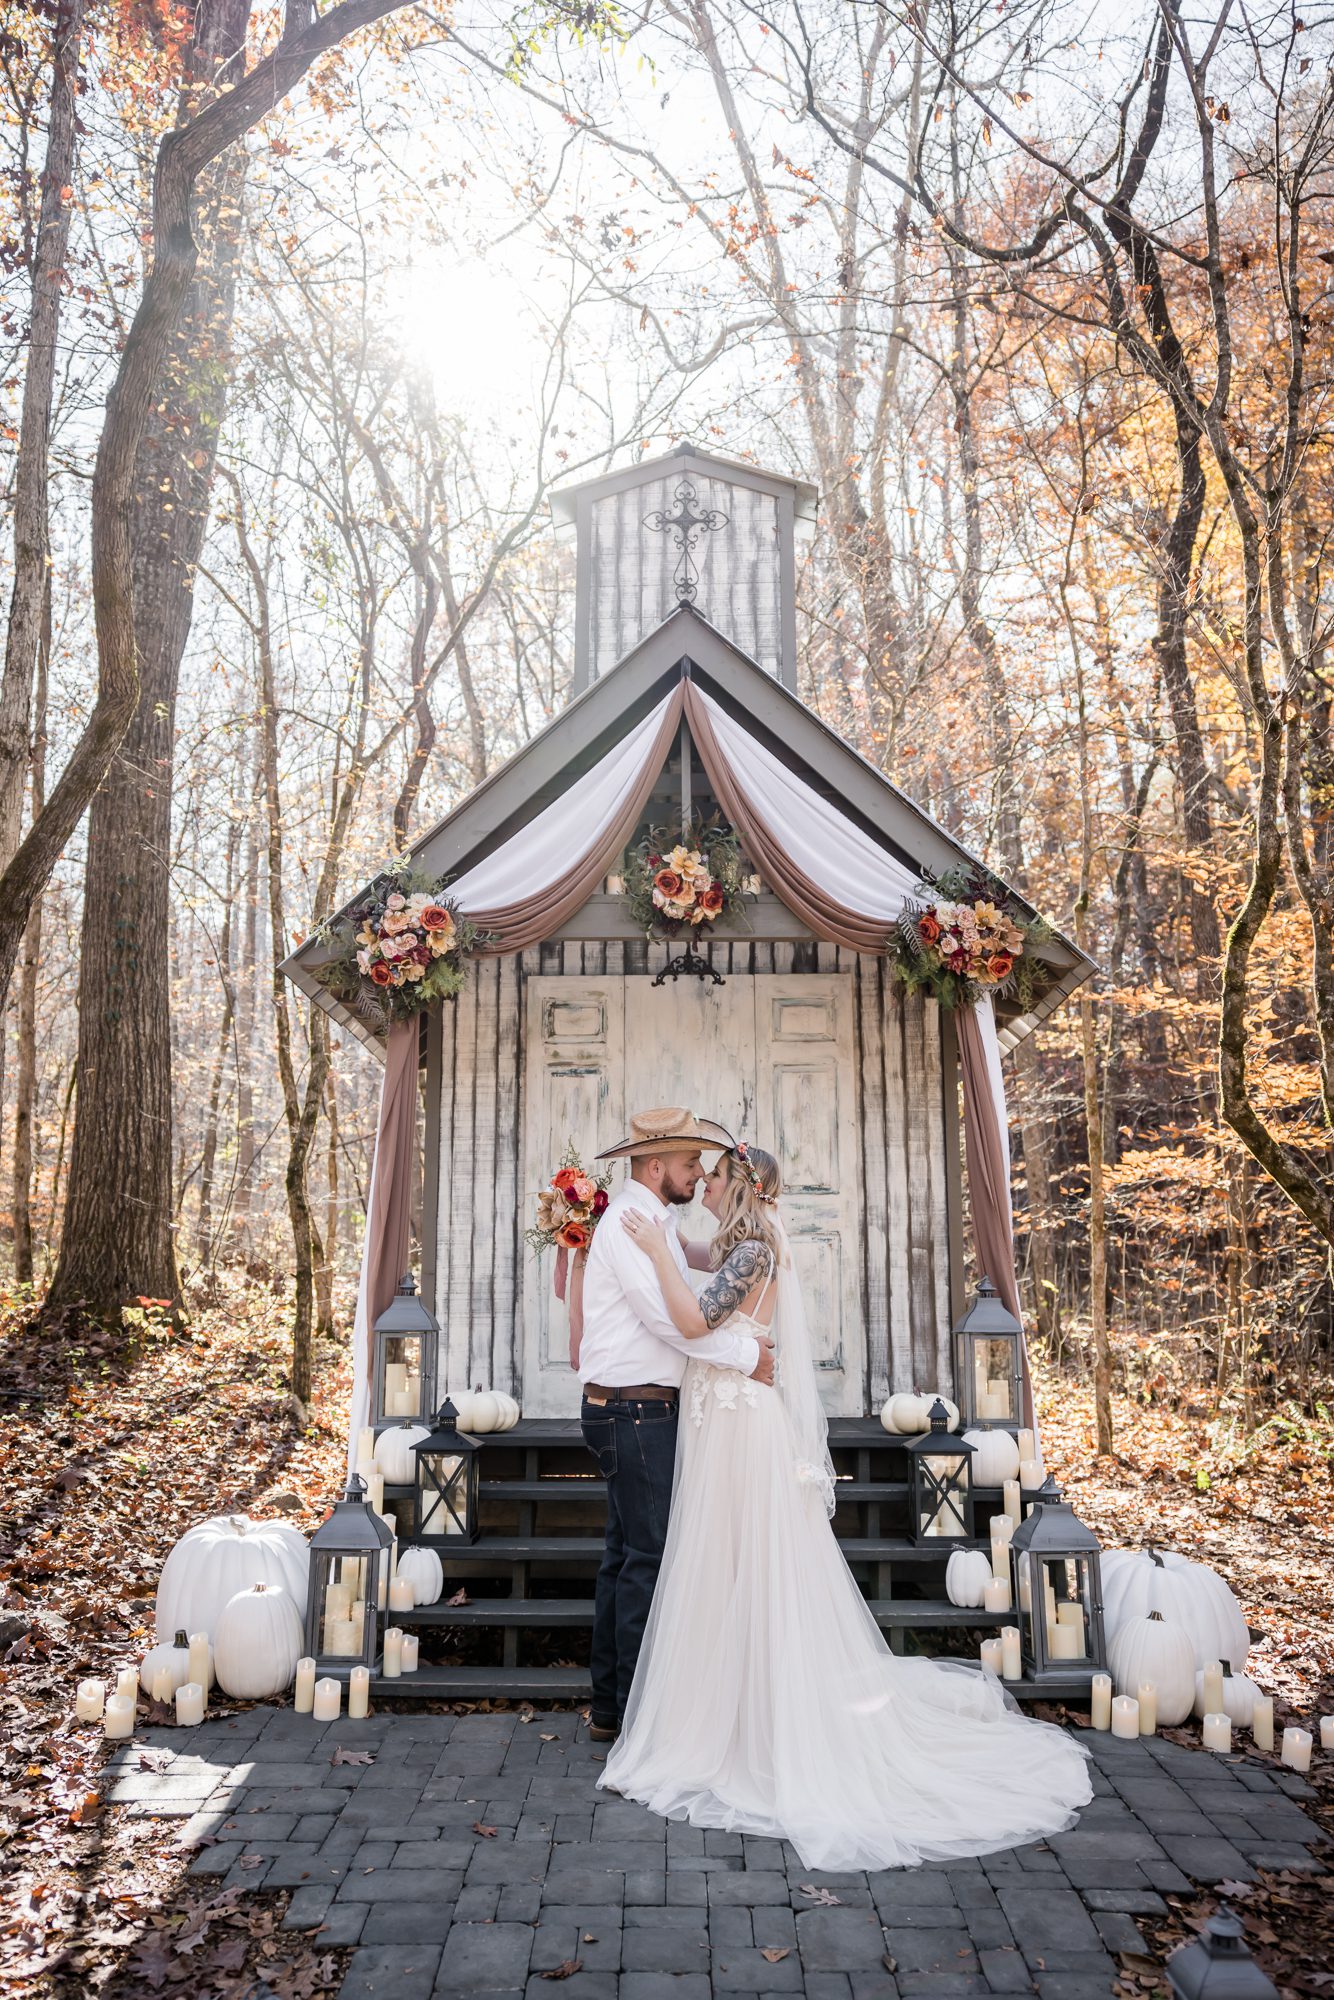 Woodsy Fall Bride and Groom Portrait